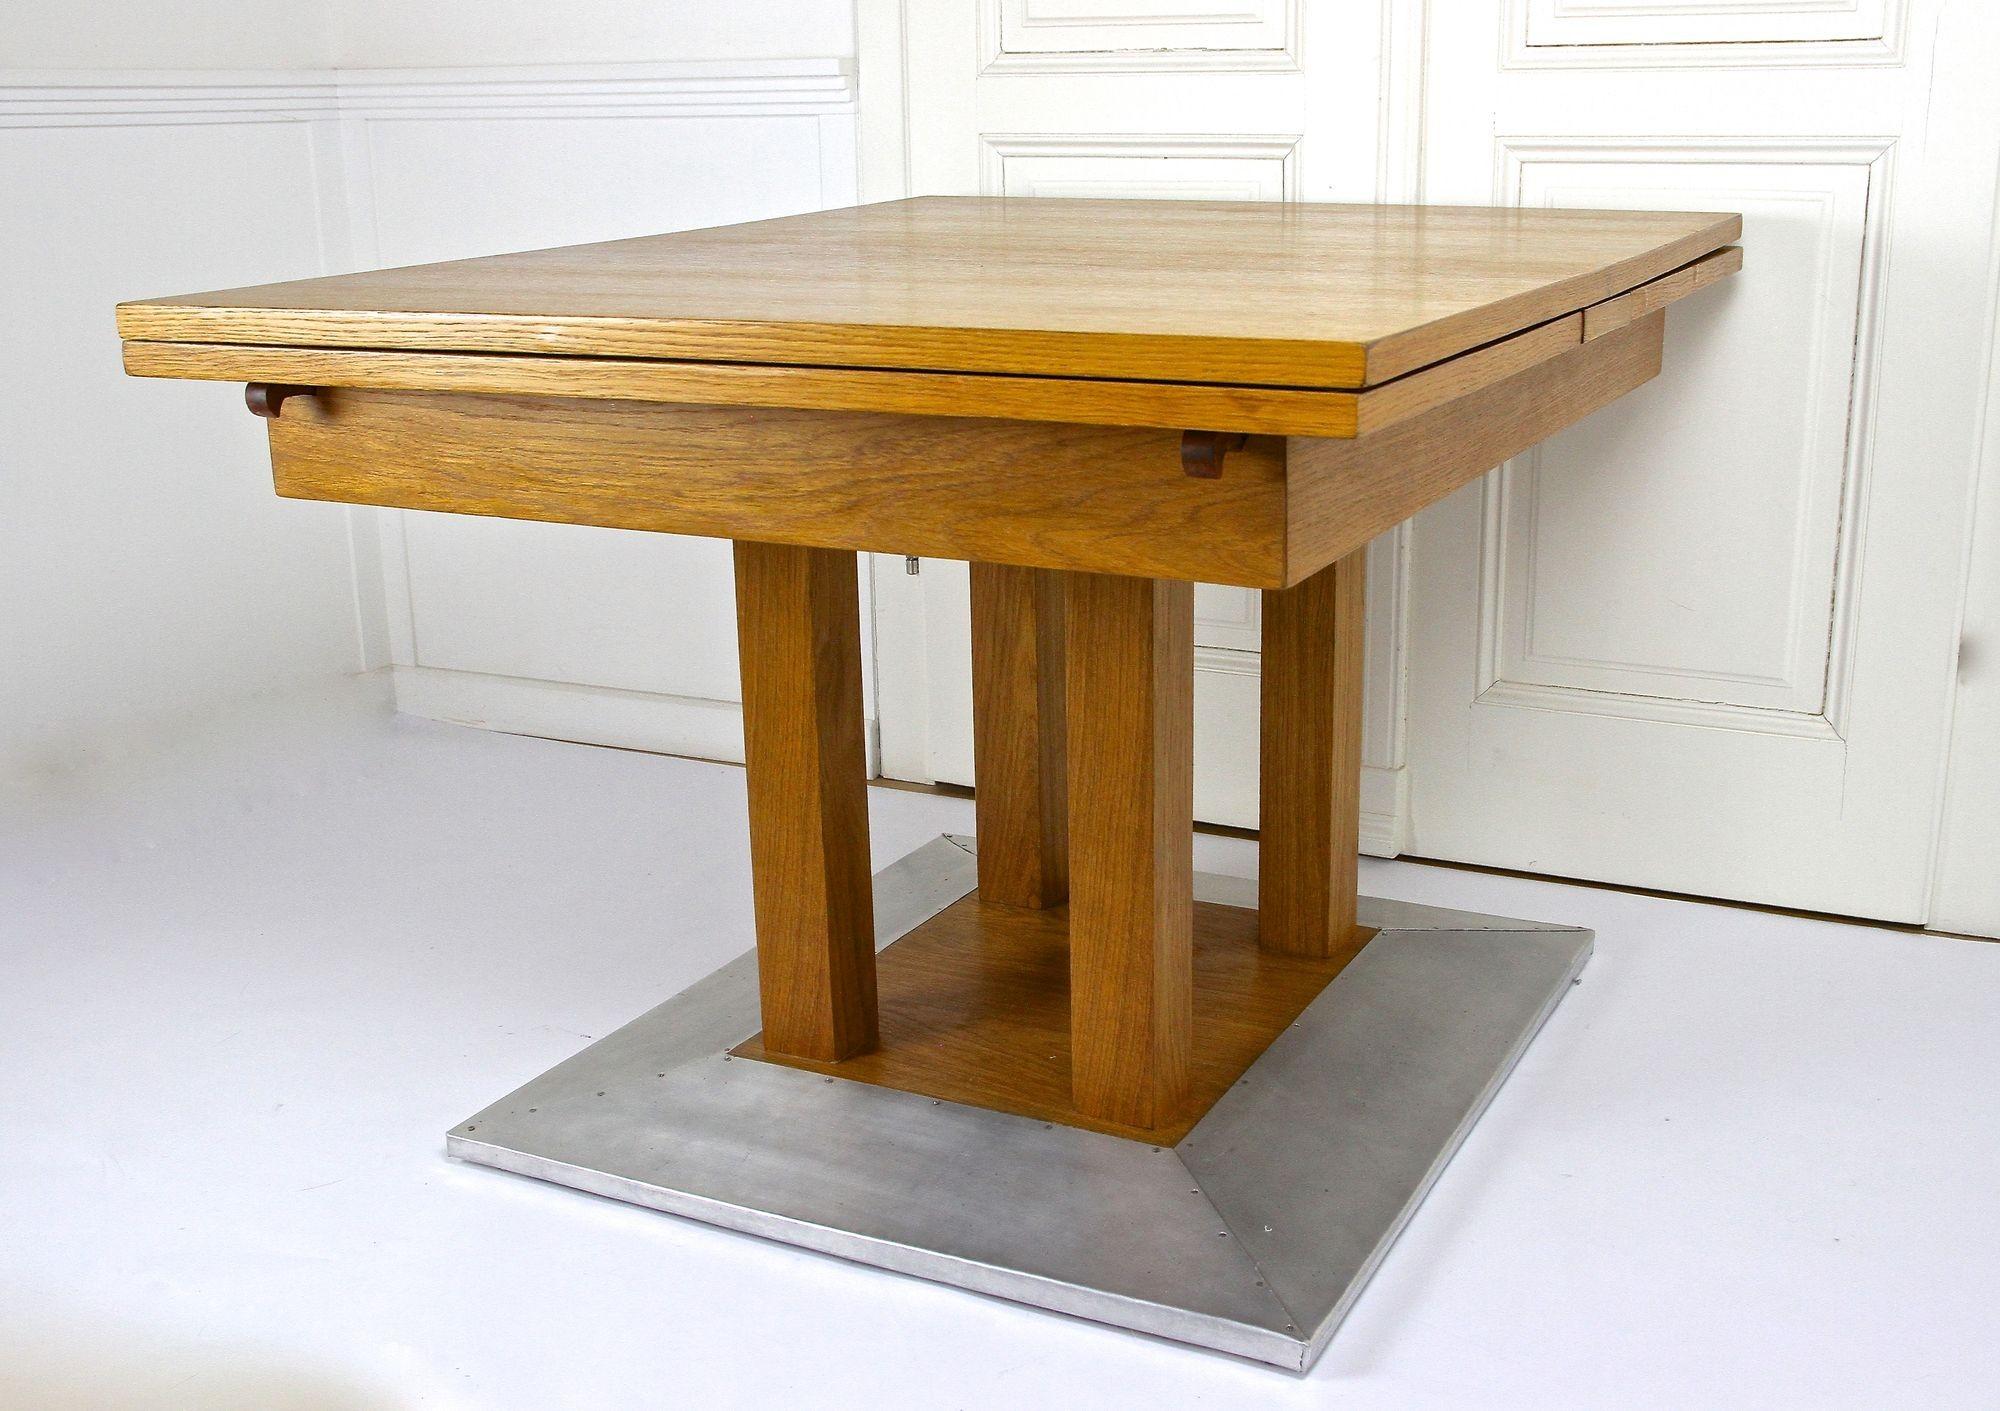 20th Century Extendable Oakwood Dining Table by Josef Hoffmann, AT ca. 1905 For Sale 2